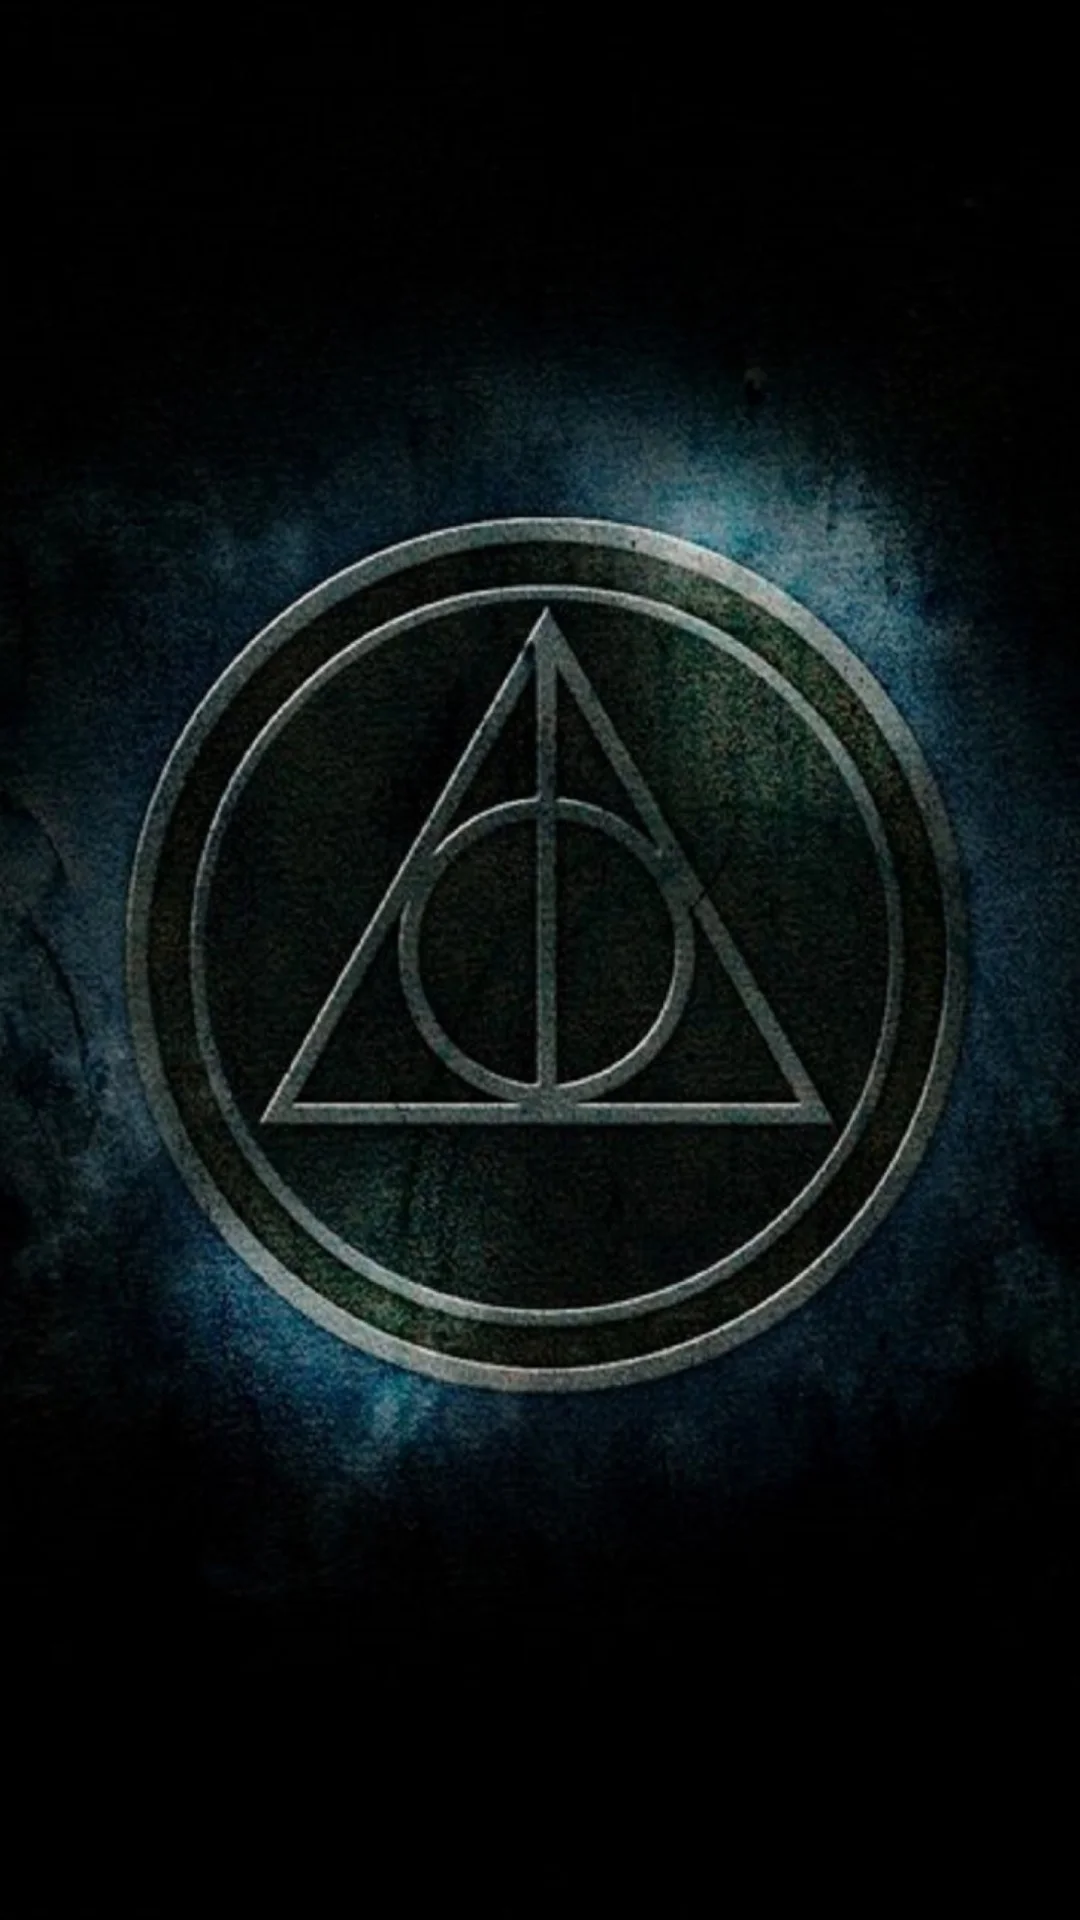 IPhone Harry Potter Wallpapers by Christopher Adams